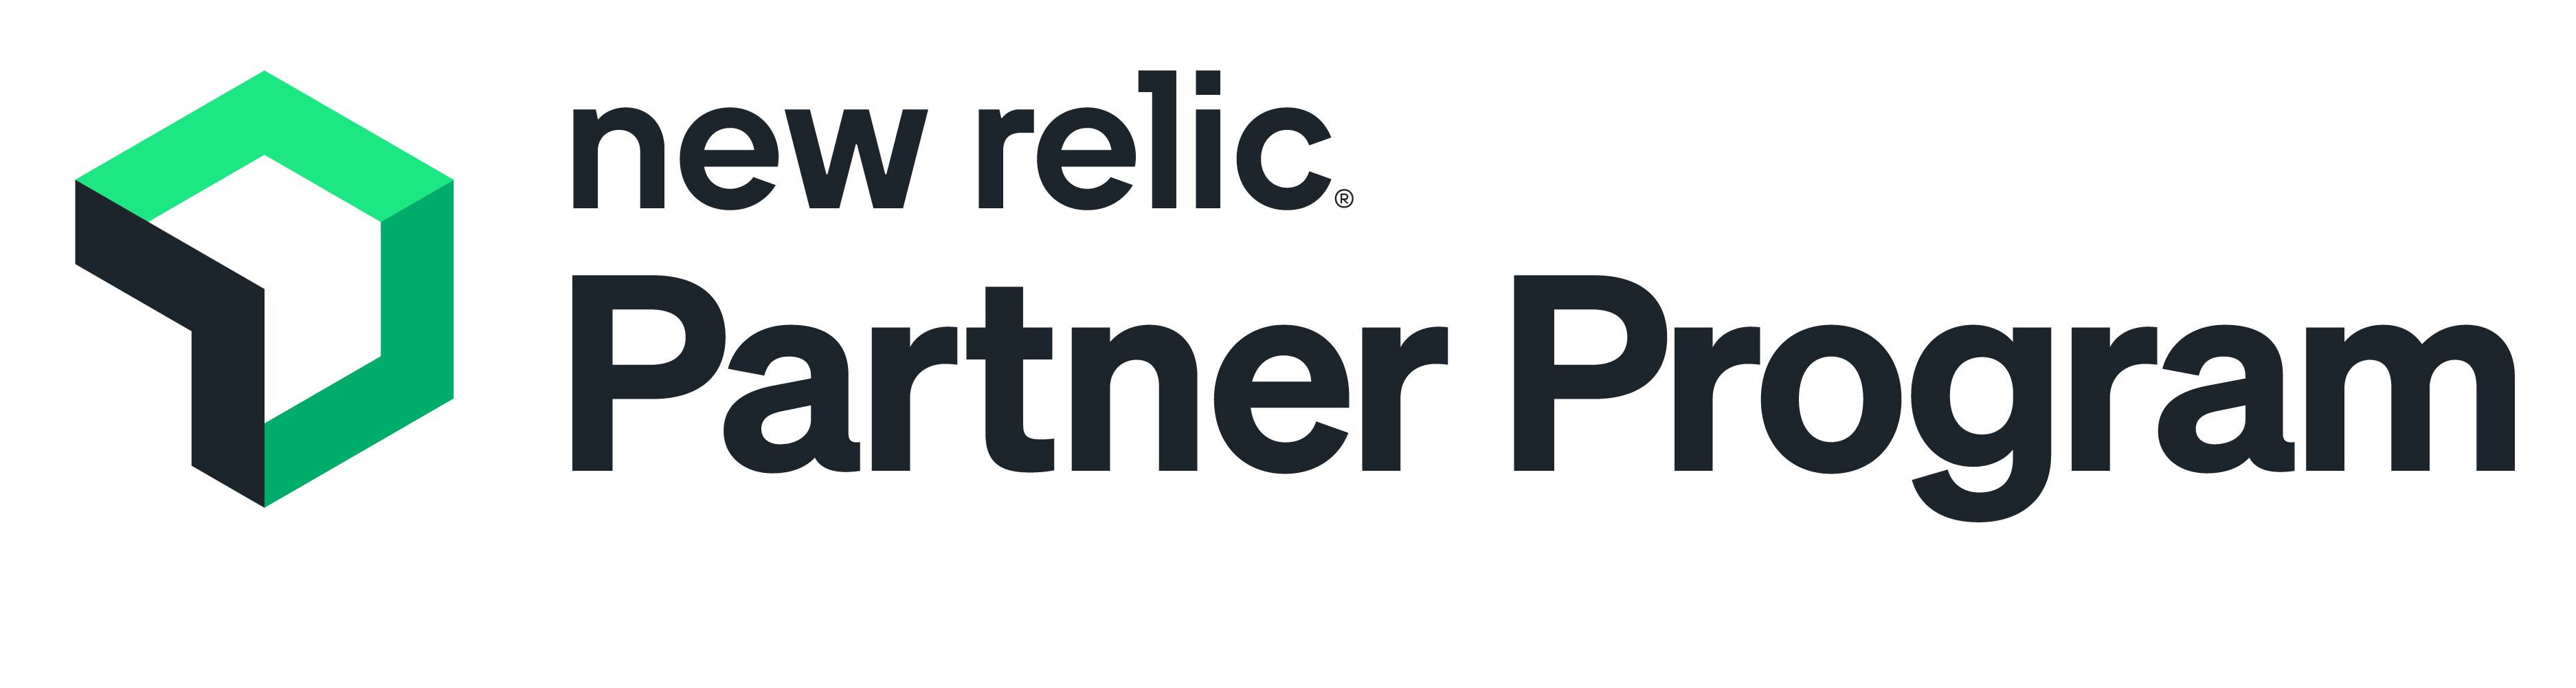 NāOM Lab is a New Relic Partner